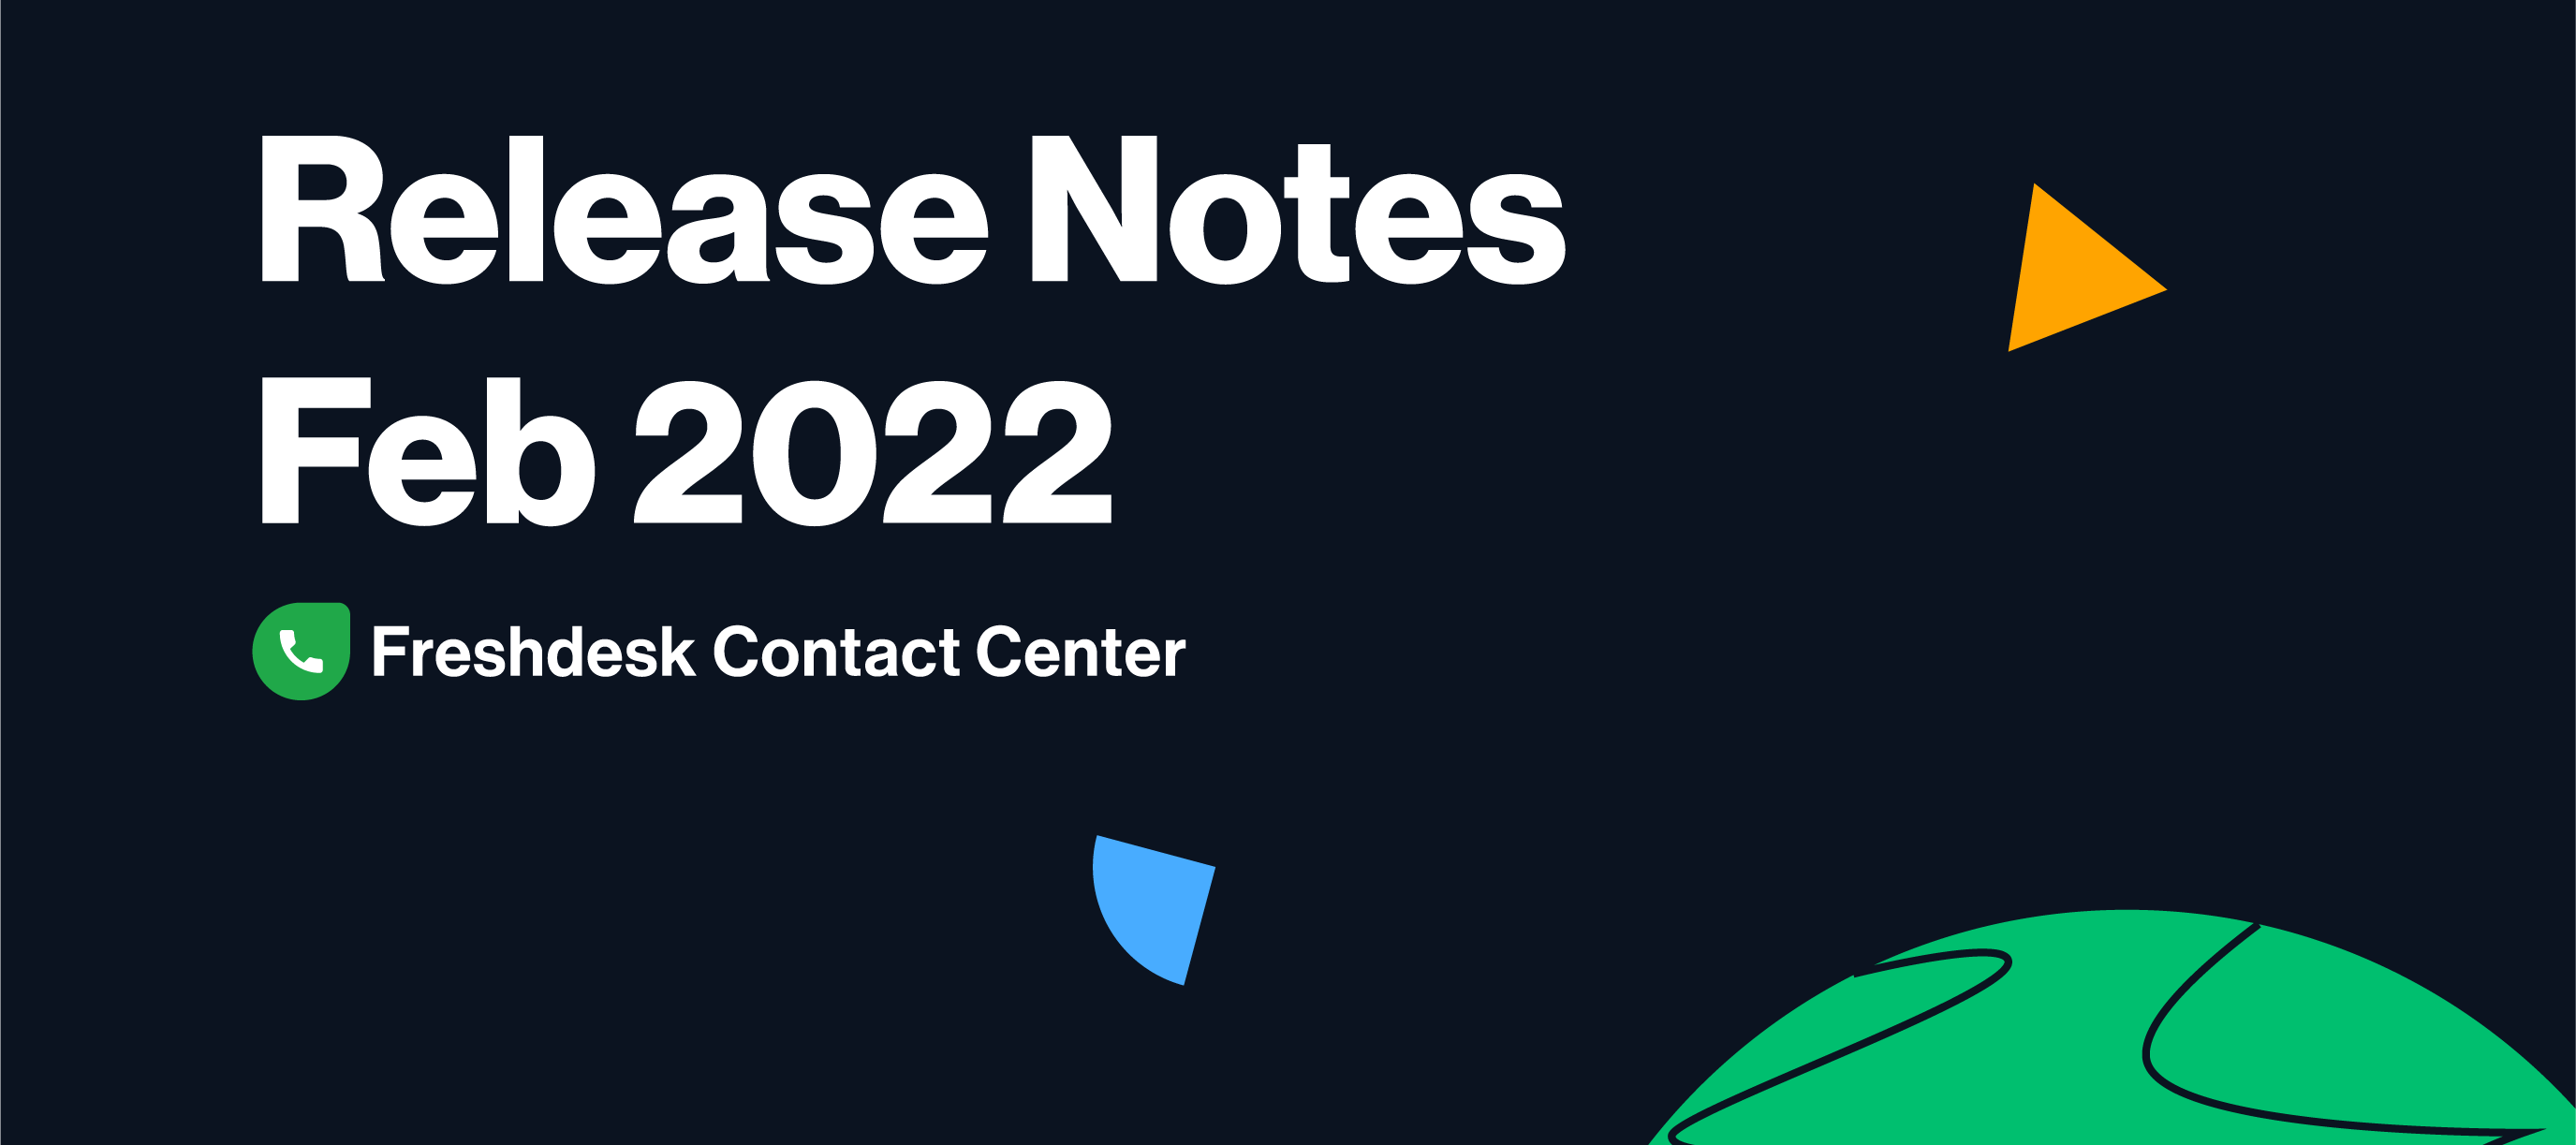 FRESHDESK CONTACT CENTER RELEASE NOTES FROM FEB 1st to FEB 28th 2022